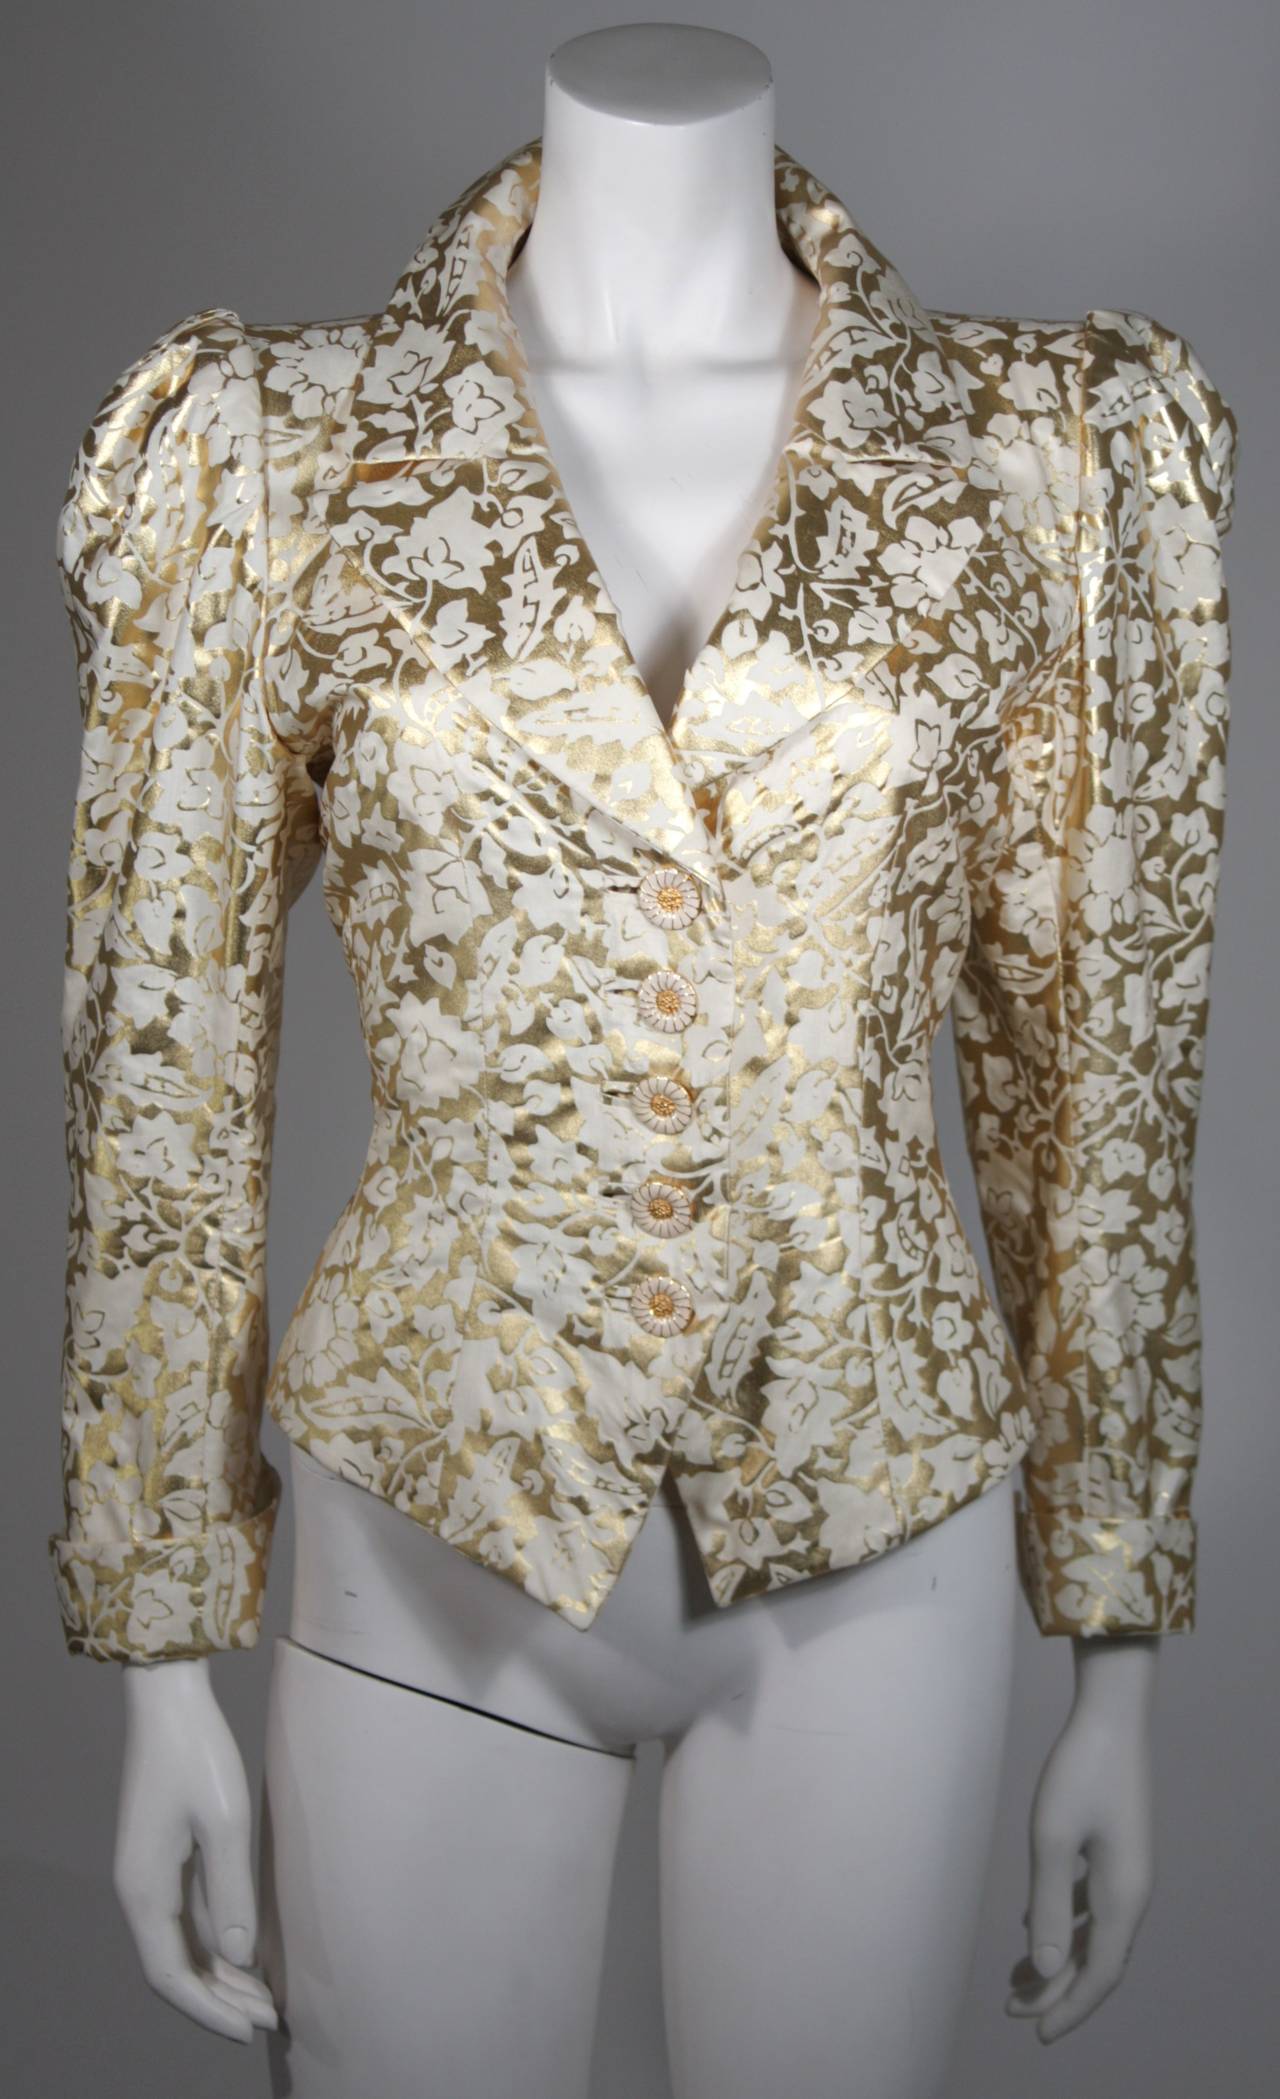 This Yves Saint Laurent jacket is composed of a gold and white fabric with a floral motif. The sleeves feature a puff style with cuff. There are gold with white enamel daisy style buttons at the center front. In excellent vintage condition. Made in